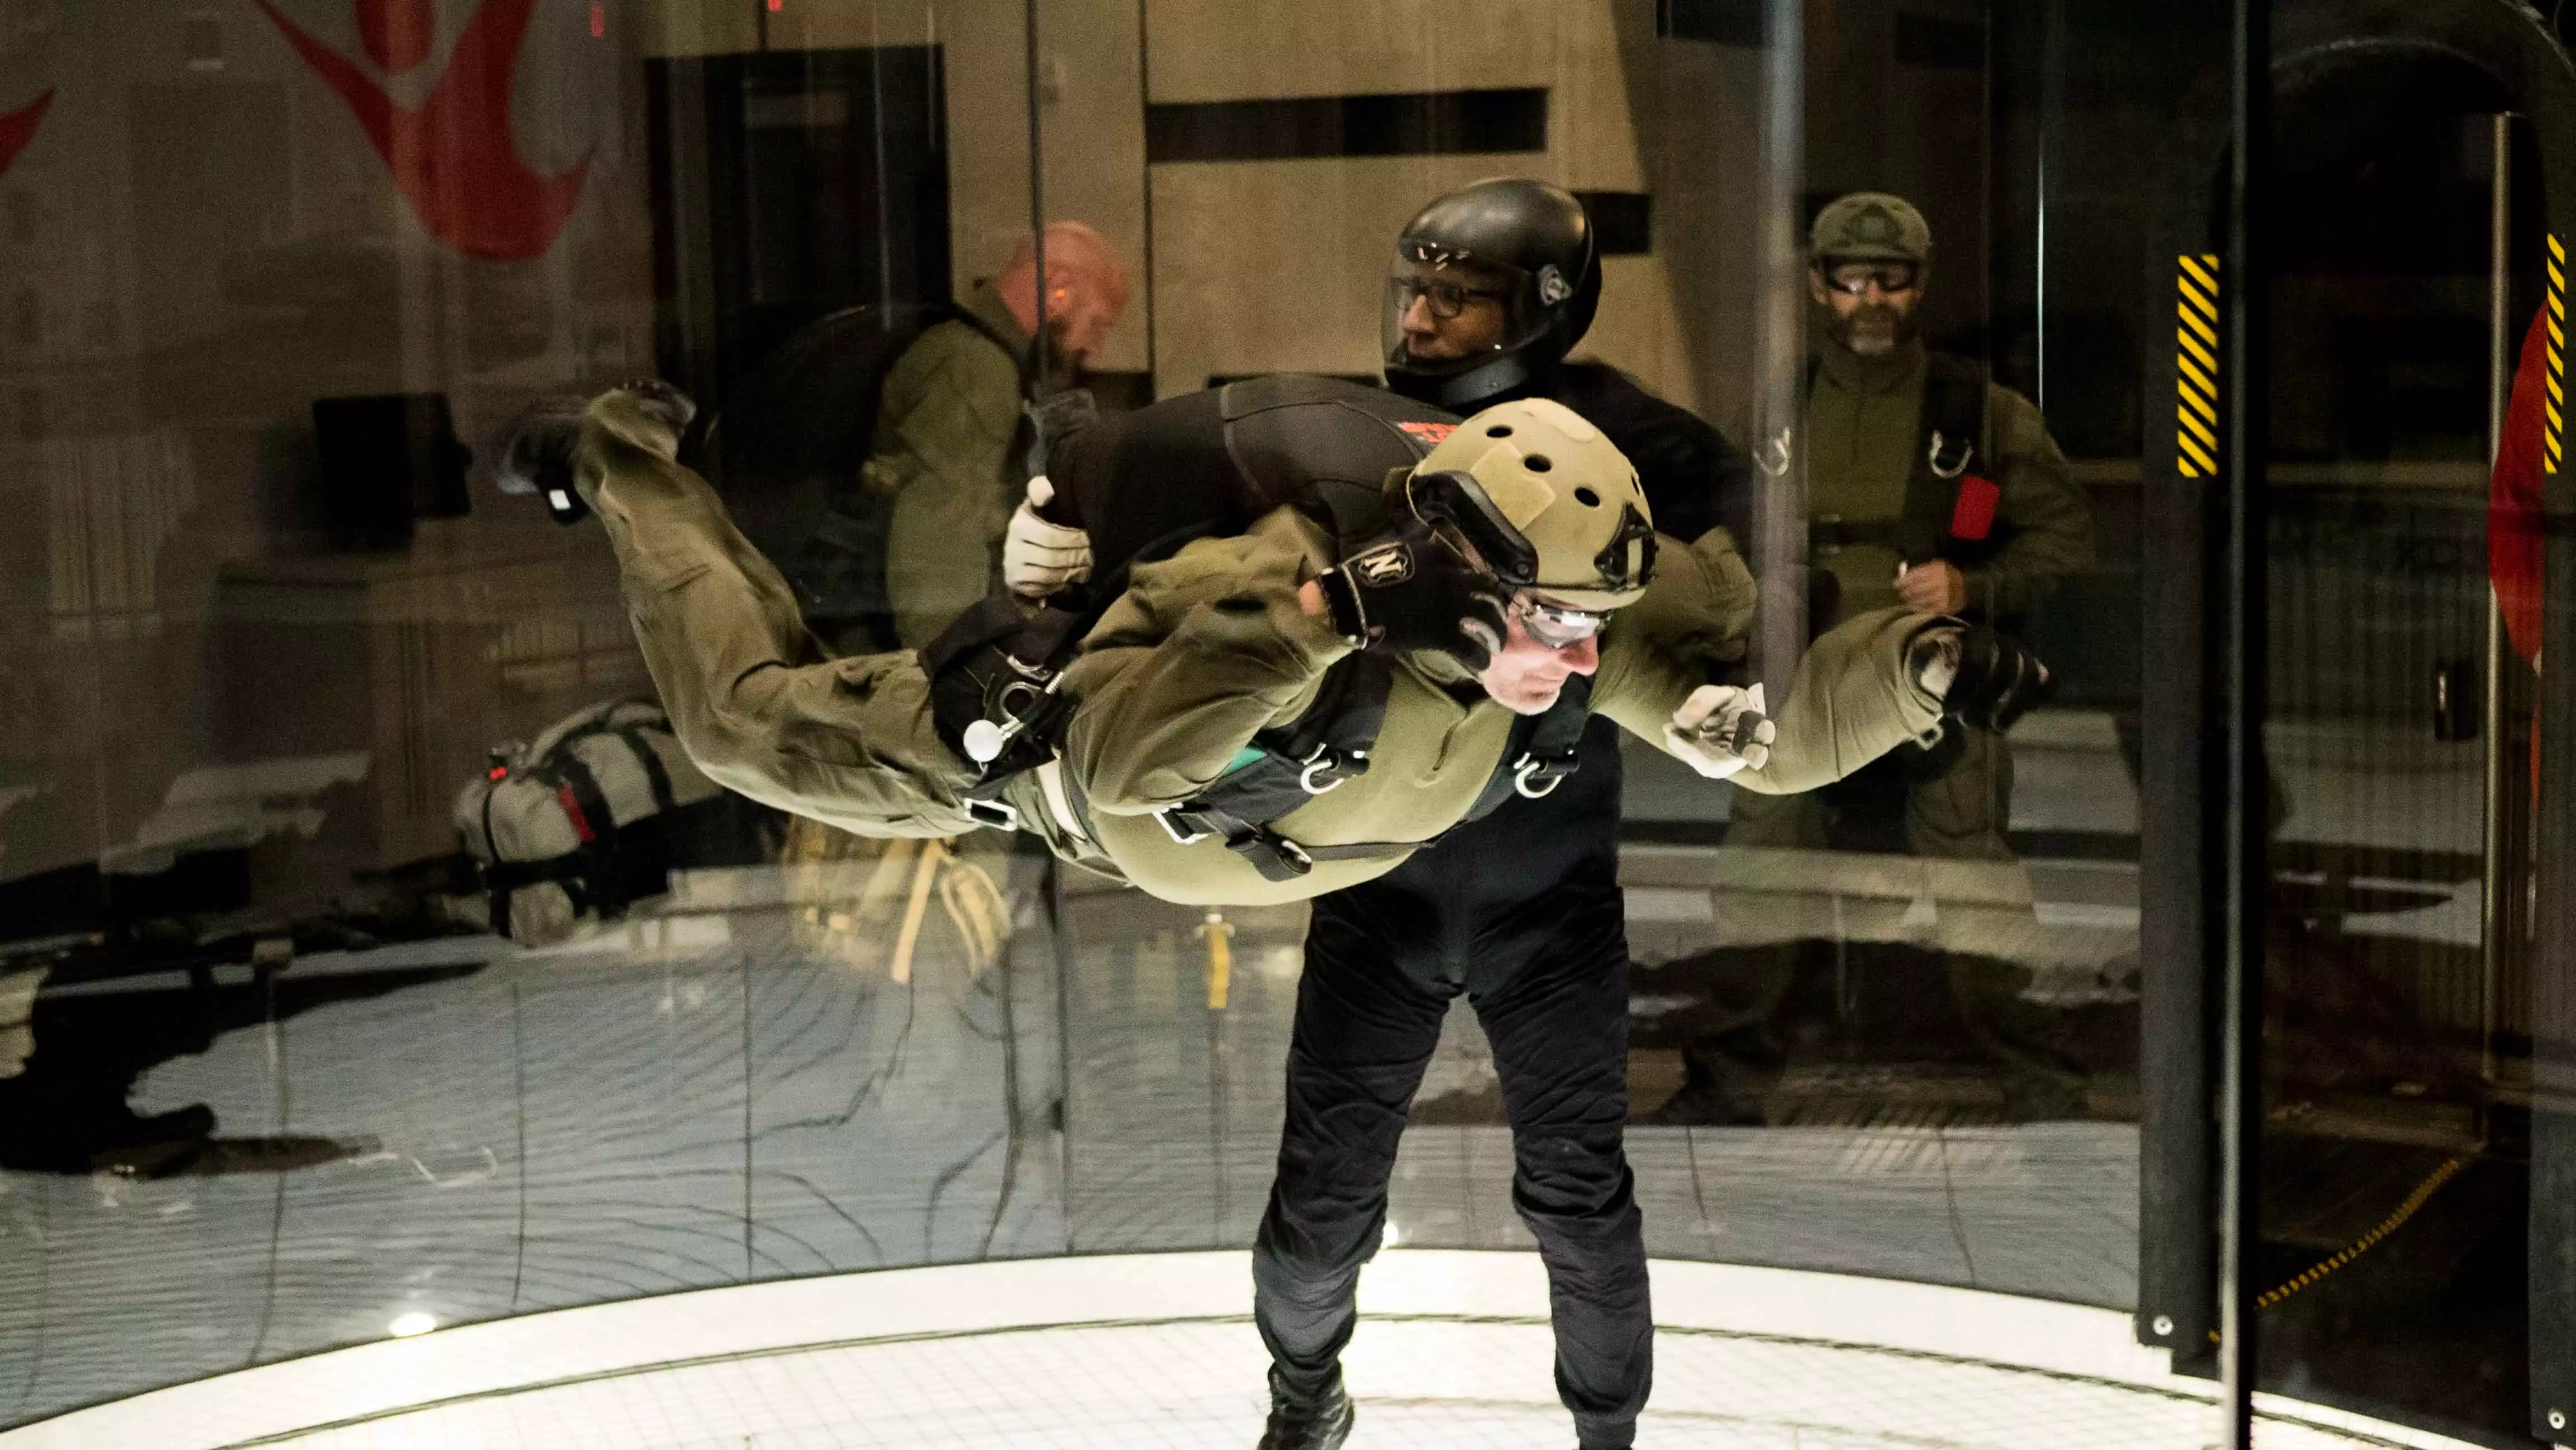 Military man flying in iFLY tunnel with an instructor by his side.